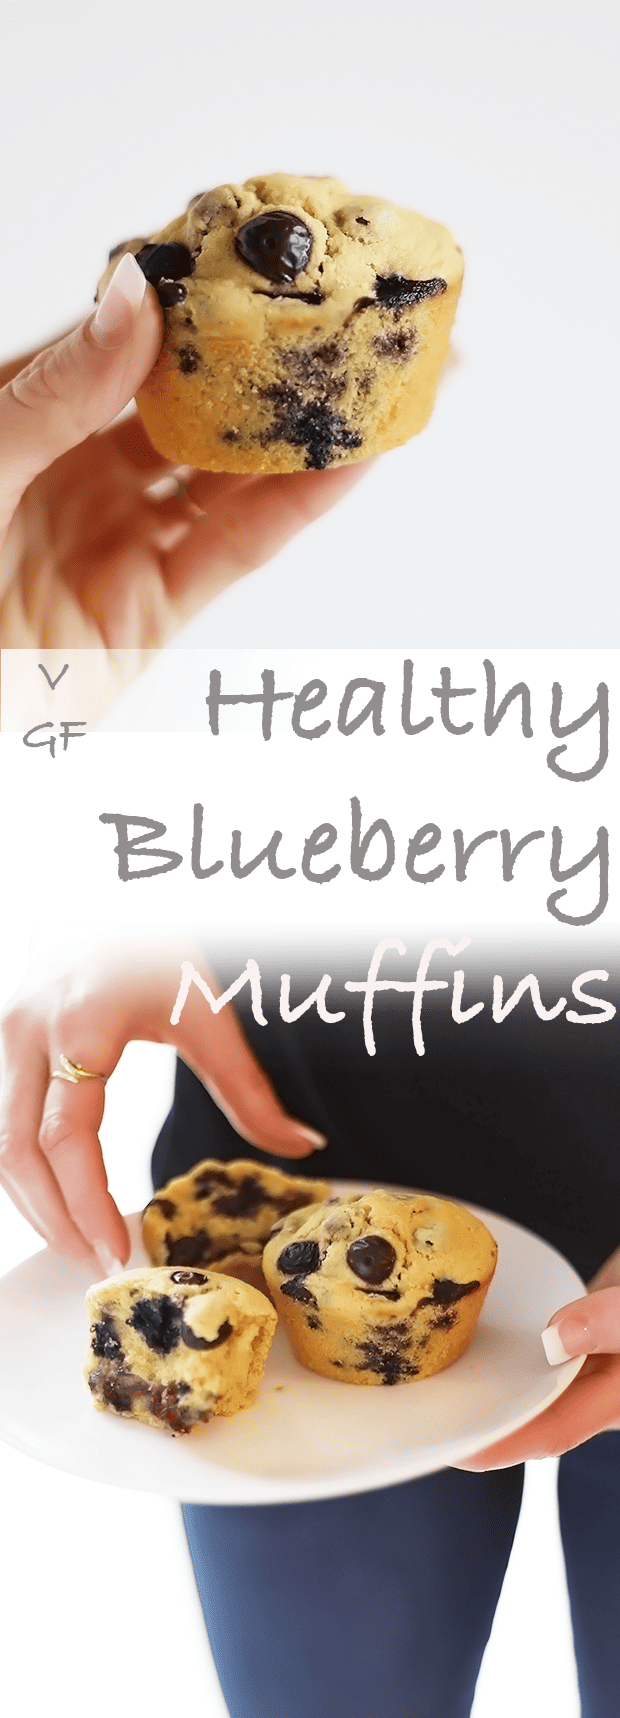 These Healthy Blueberry Muffins are super quick and easy to make! They are vegan, gluten free, refined sugar free and the texture is light and soft! | TwoRaspberries.com